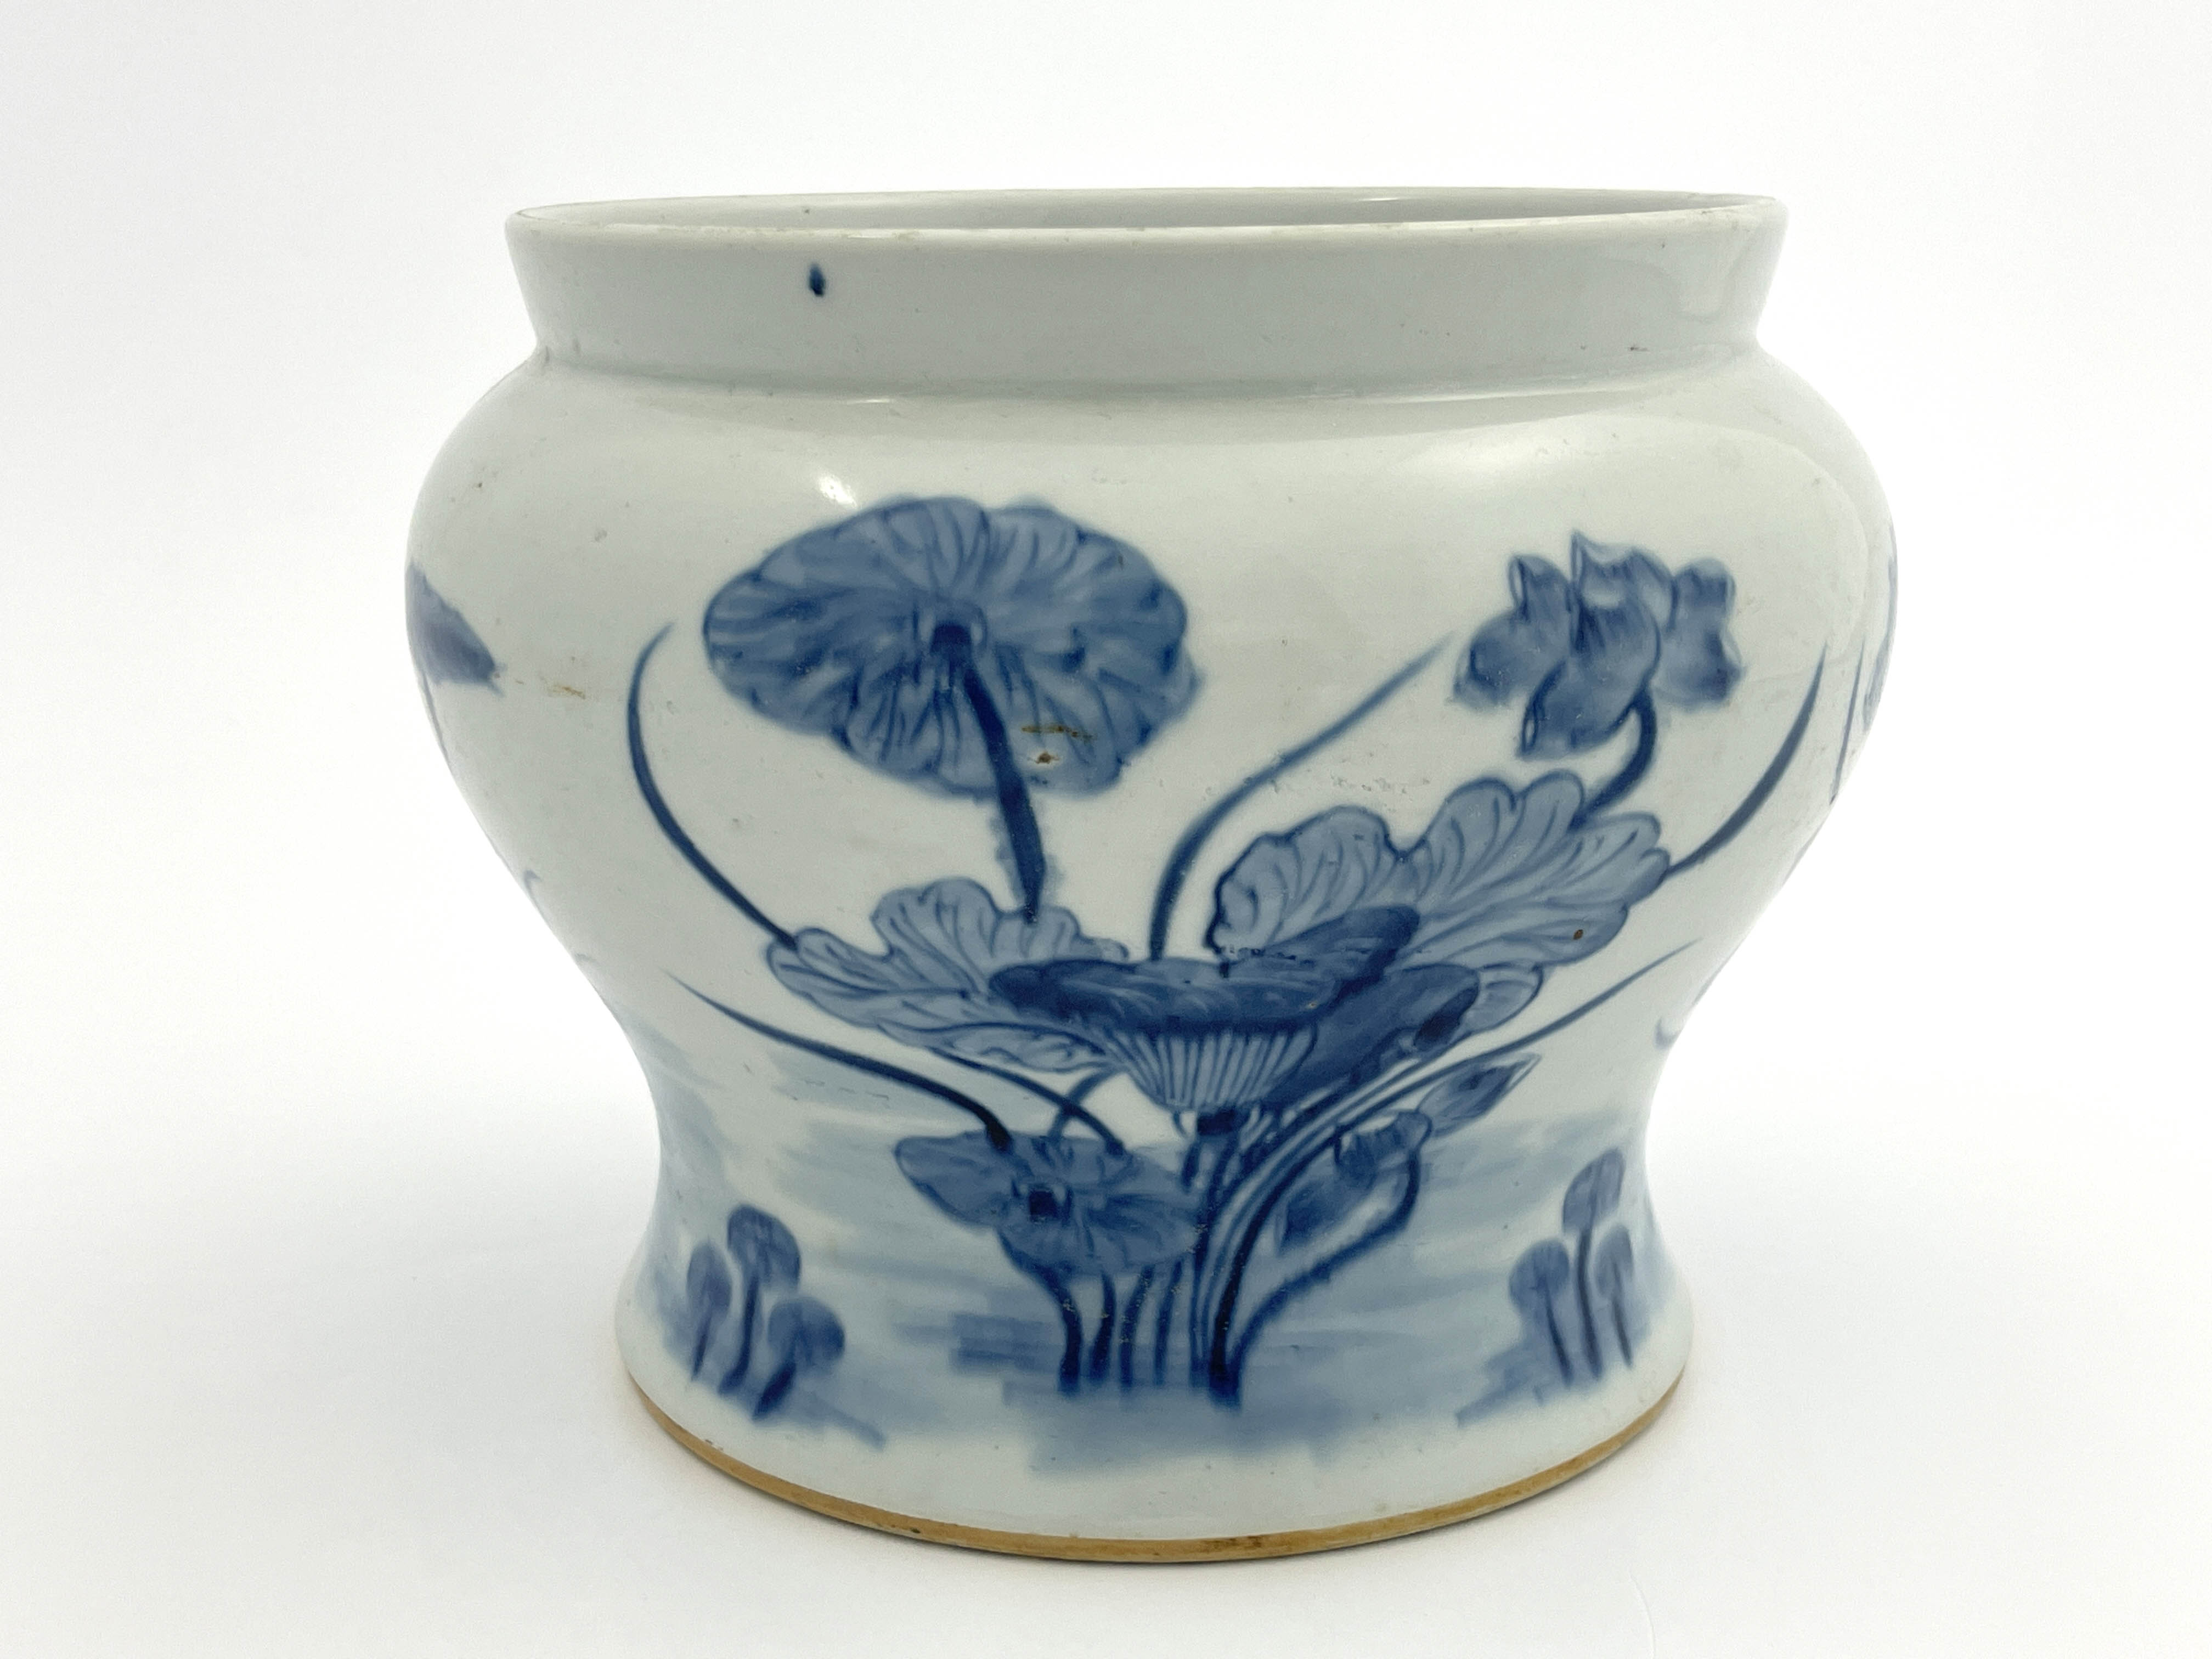 A 19th Century Chinese provincial blue and white jardiniere, of bombe form, painted with a frieze of - Image 2 of 4